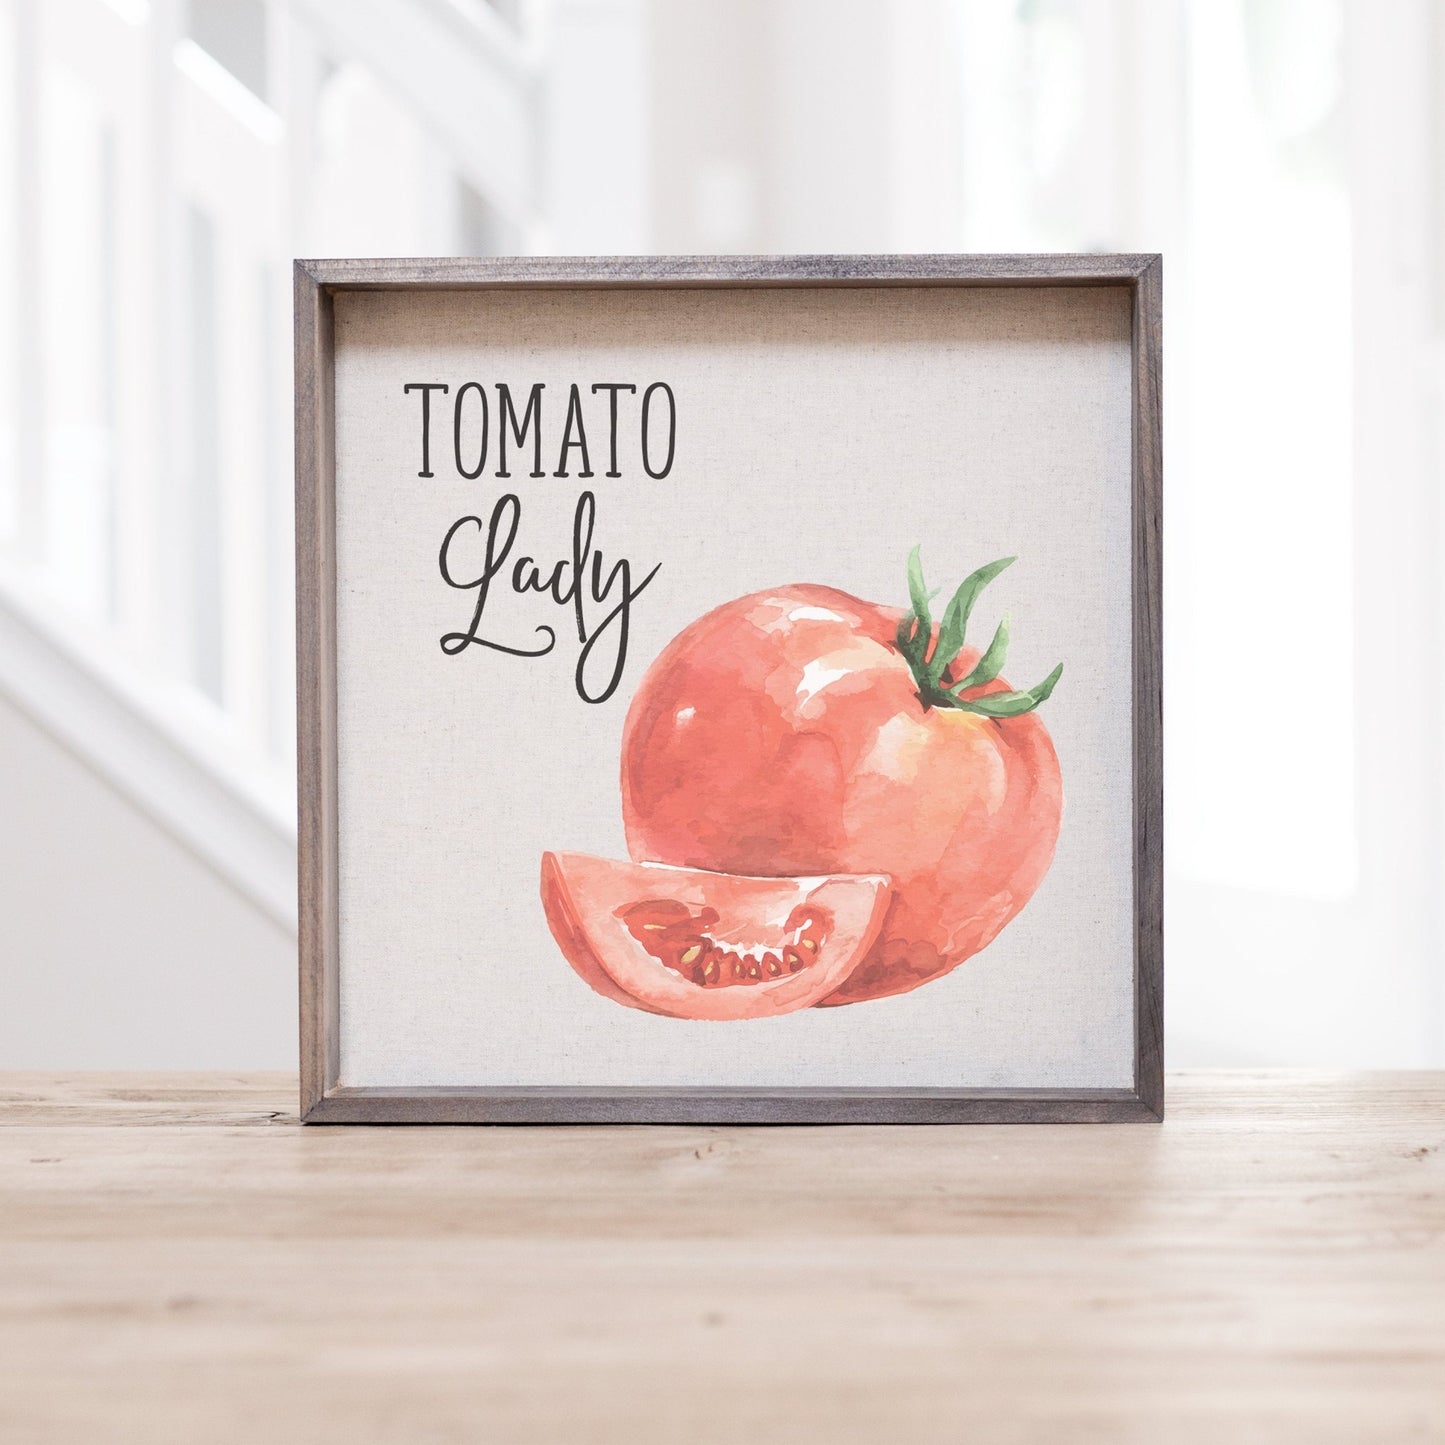 Load image into Gallery viewer, Tomato Lady Garden Wood Sign | Crazy Tomato Lady Sign | Garden Lover Gift Idea | Farmhouse Kitchen Sign | Rustic Garden Decor - Sweet Hooligans Design
